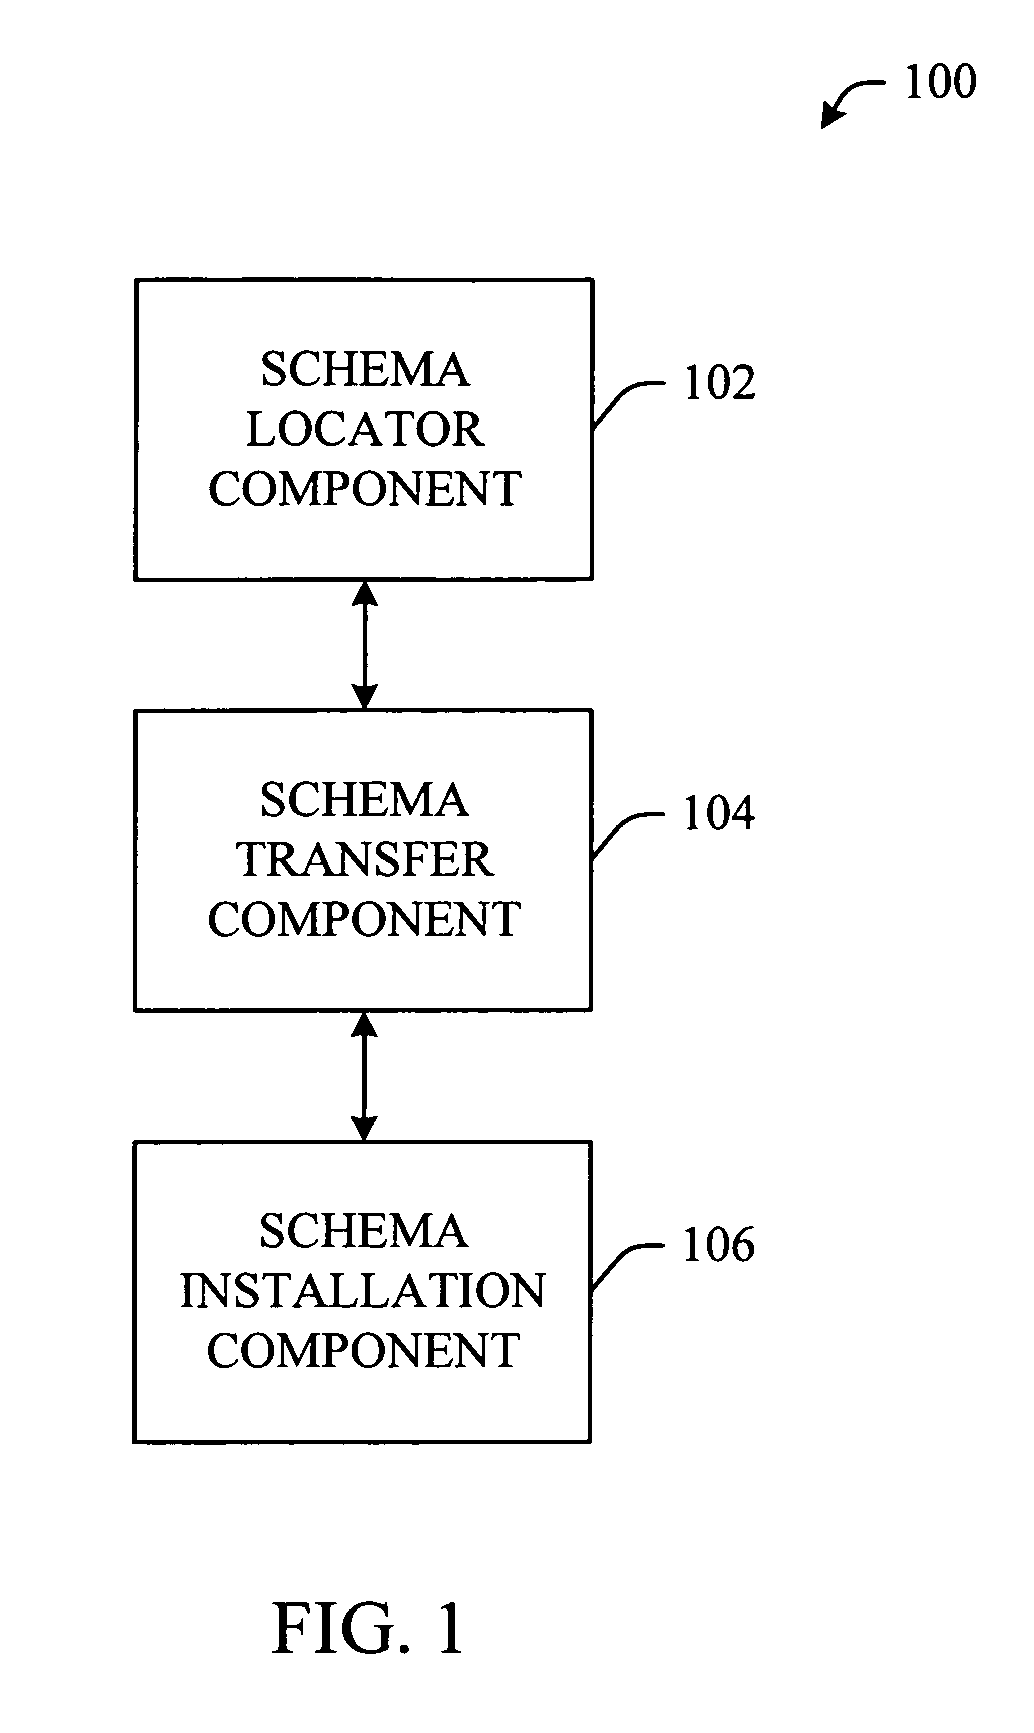 Schema signing and just-in-time installation